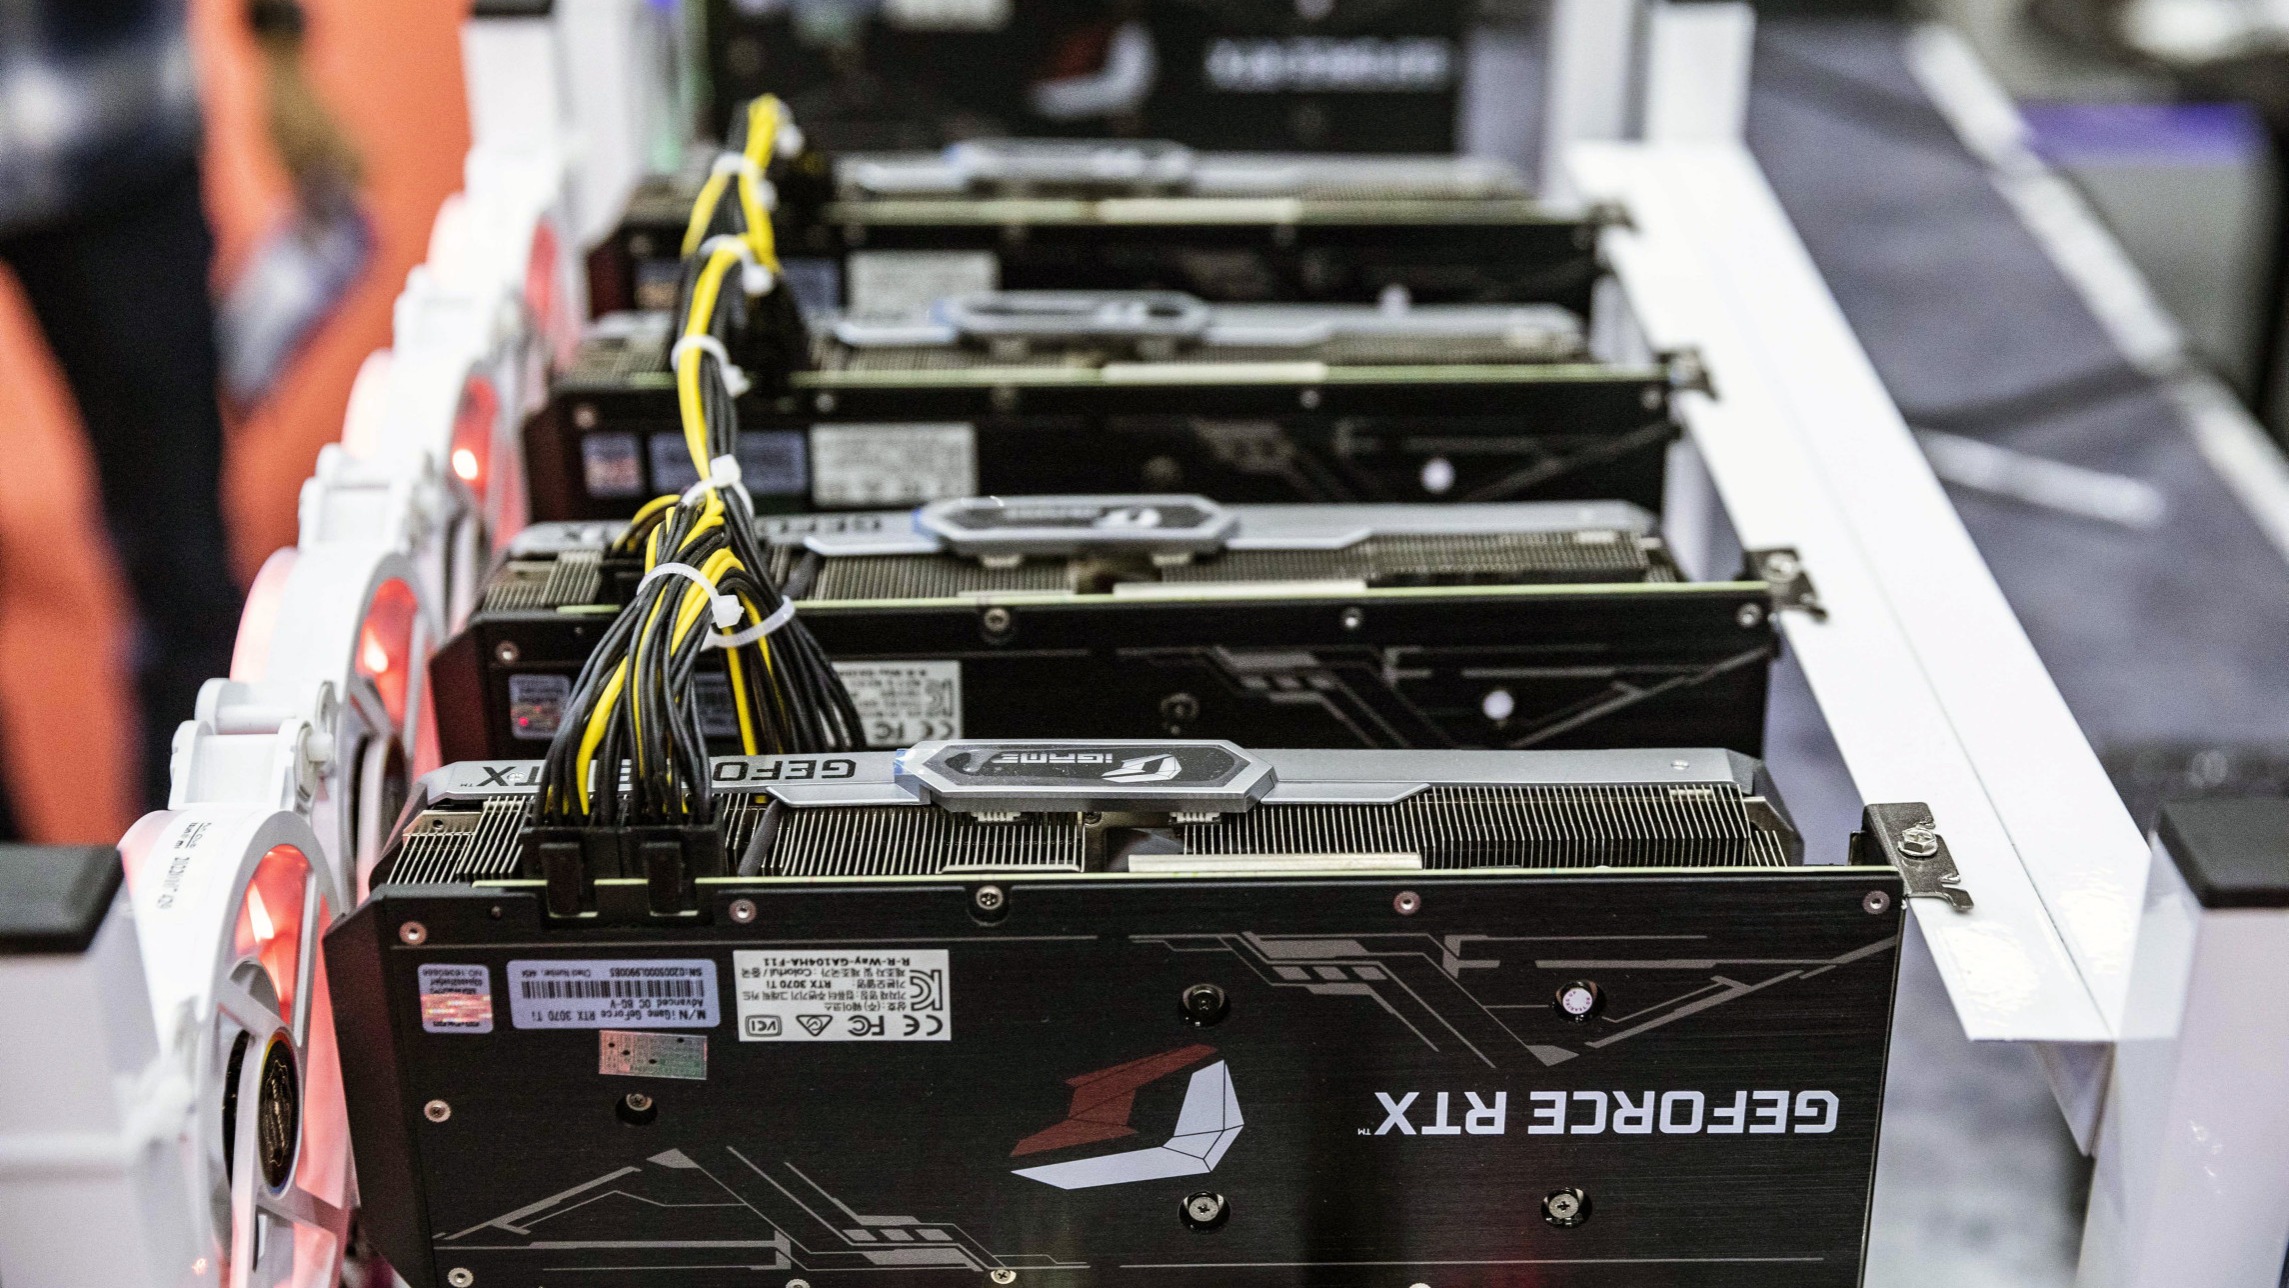 Ether miners repurpose tools the 'Merge' | Times